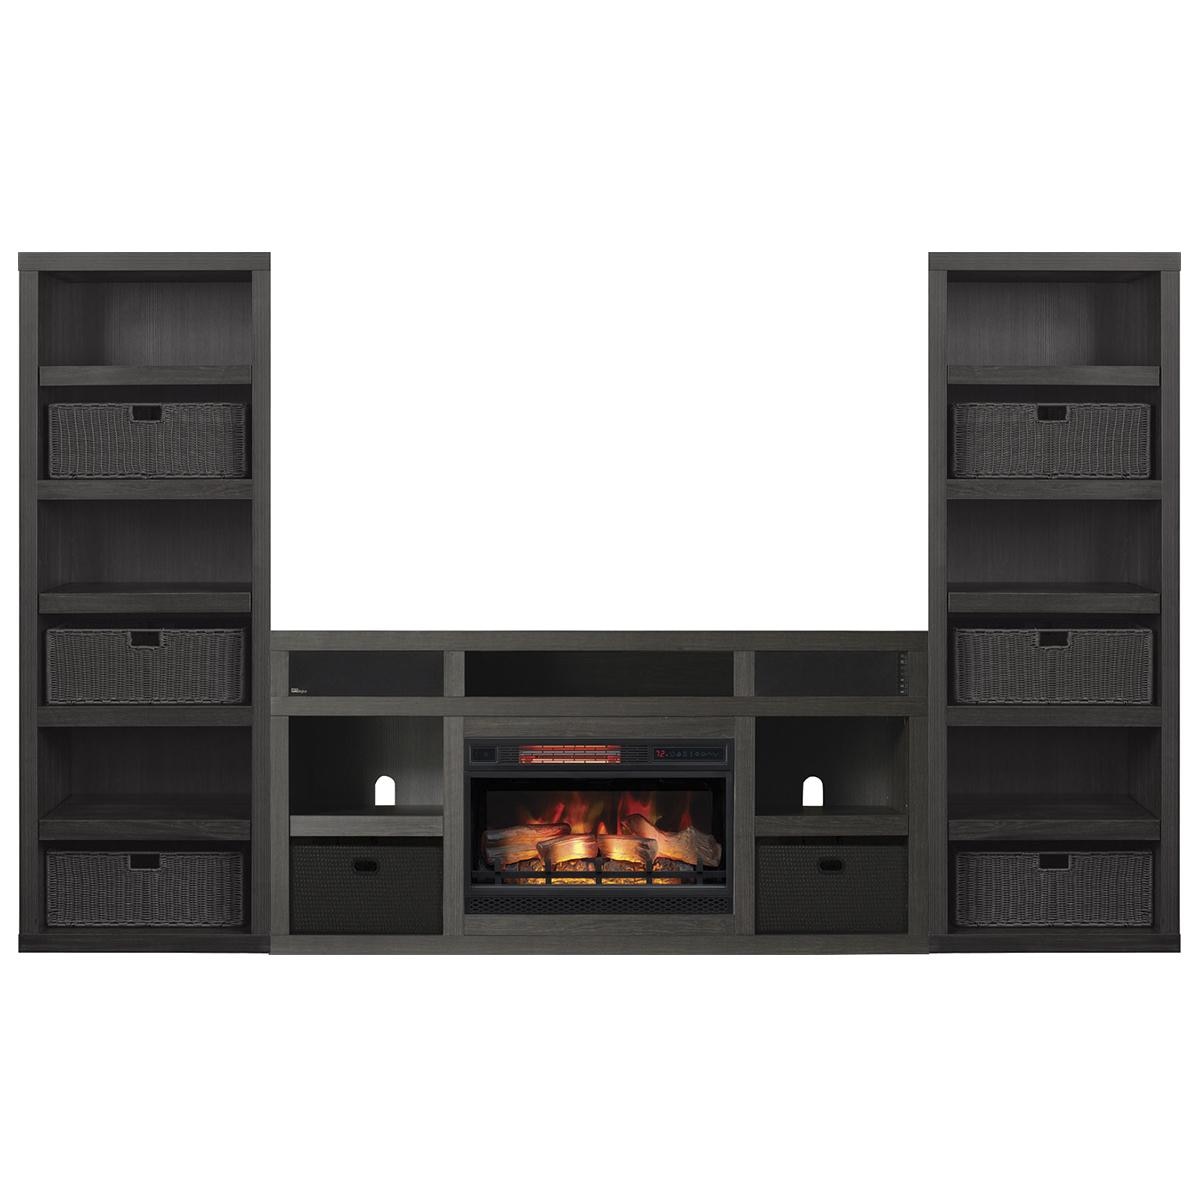 Classic Flame Electric Fireplace Manual Lovely Fabio Flames Greatlin 3 Piece Fireplace Entertainment Wall